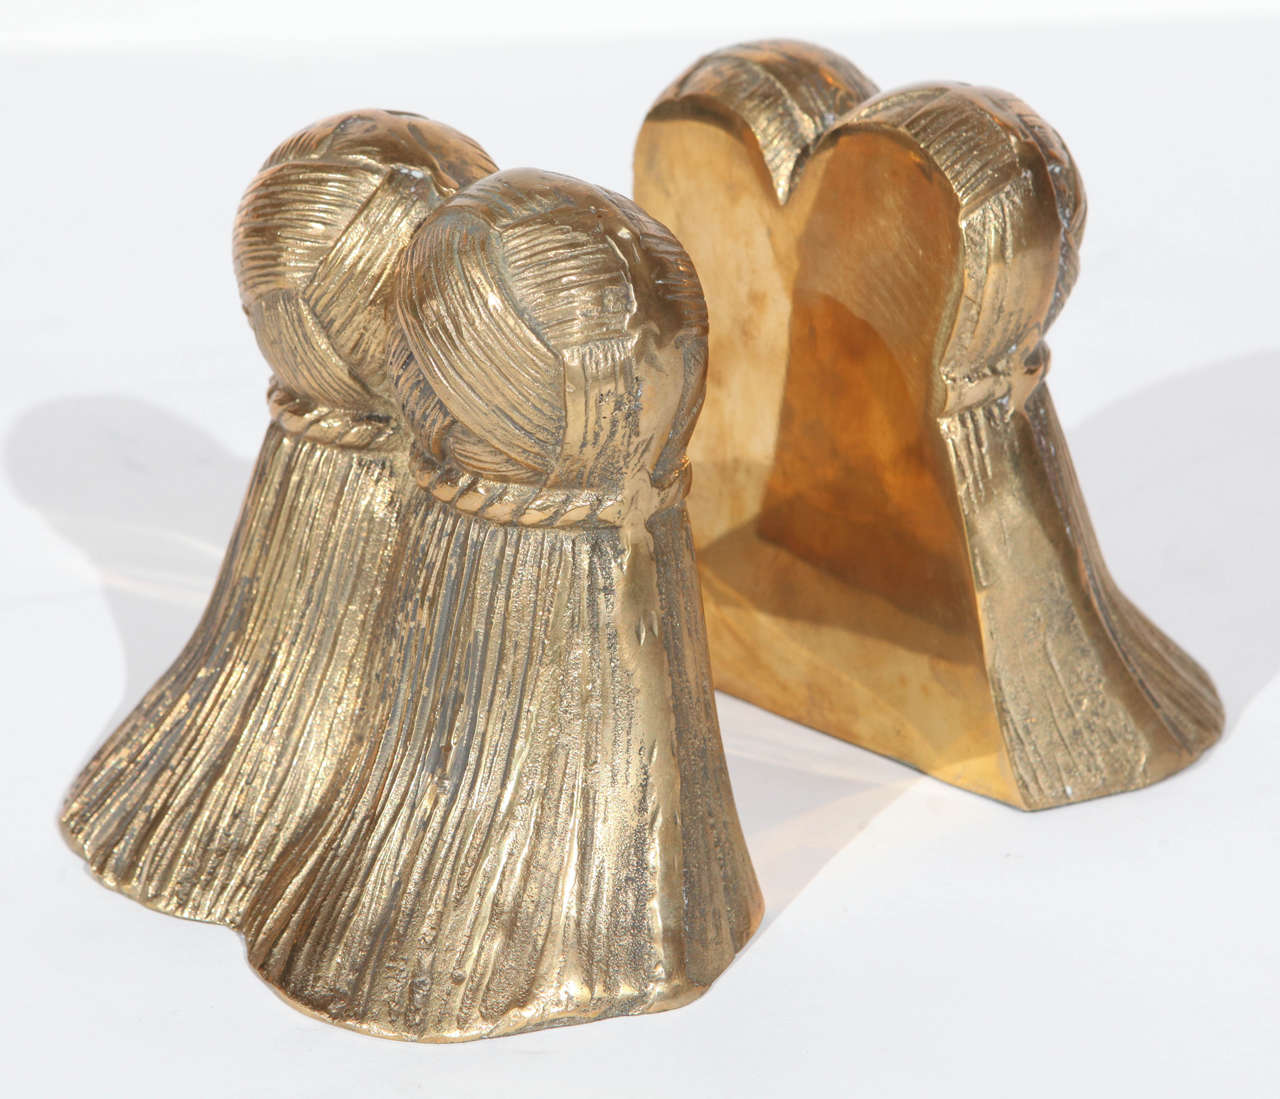 A wonderful pair of vintage solid brass tassel bookends. Each bookend measures 7